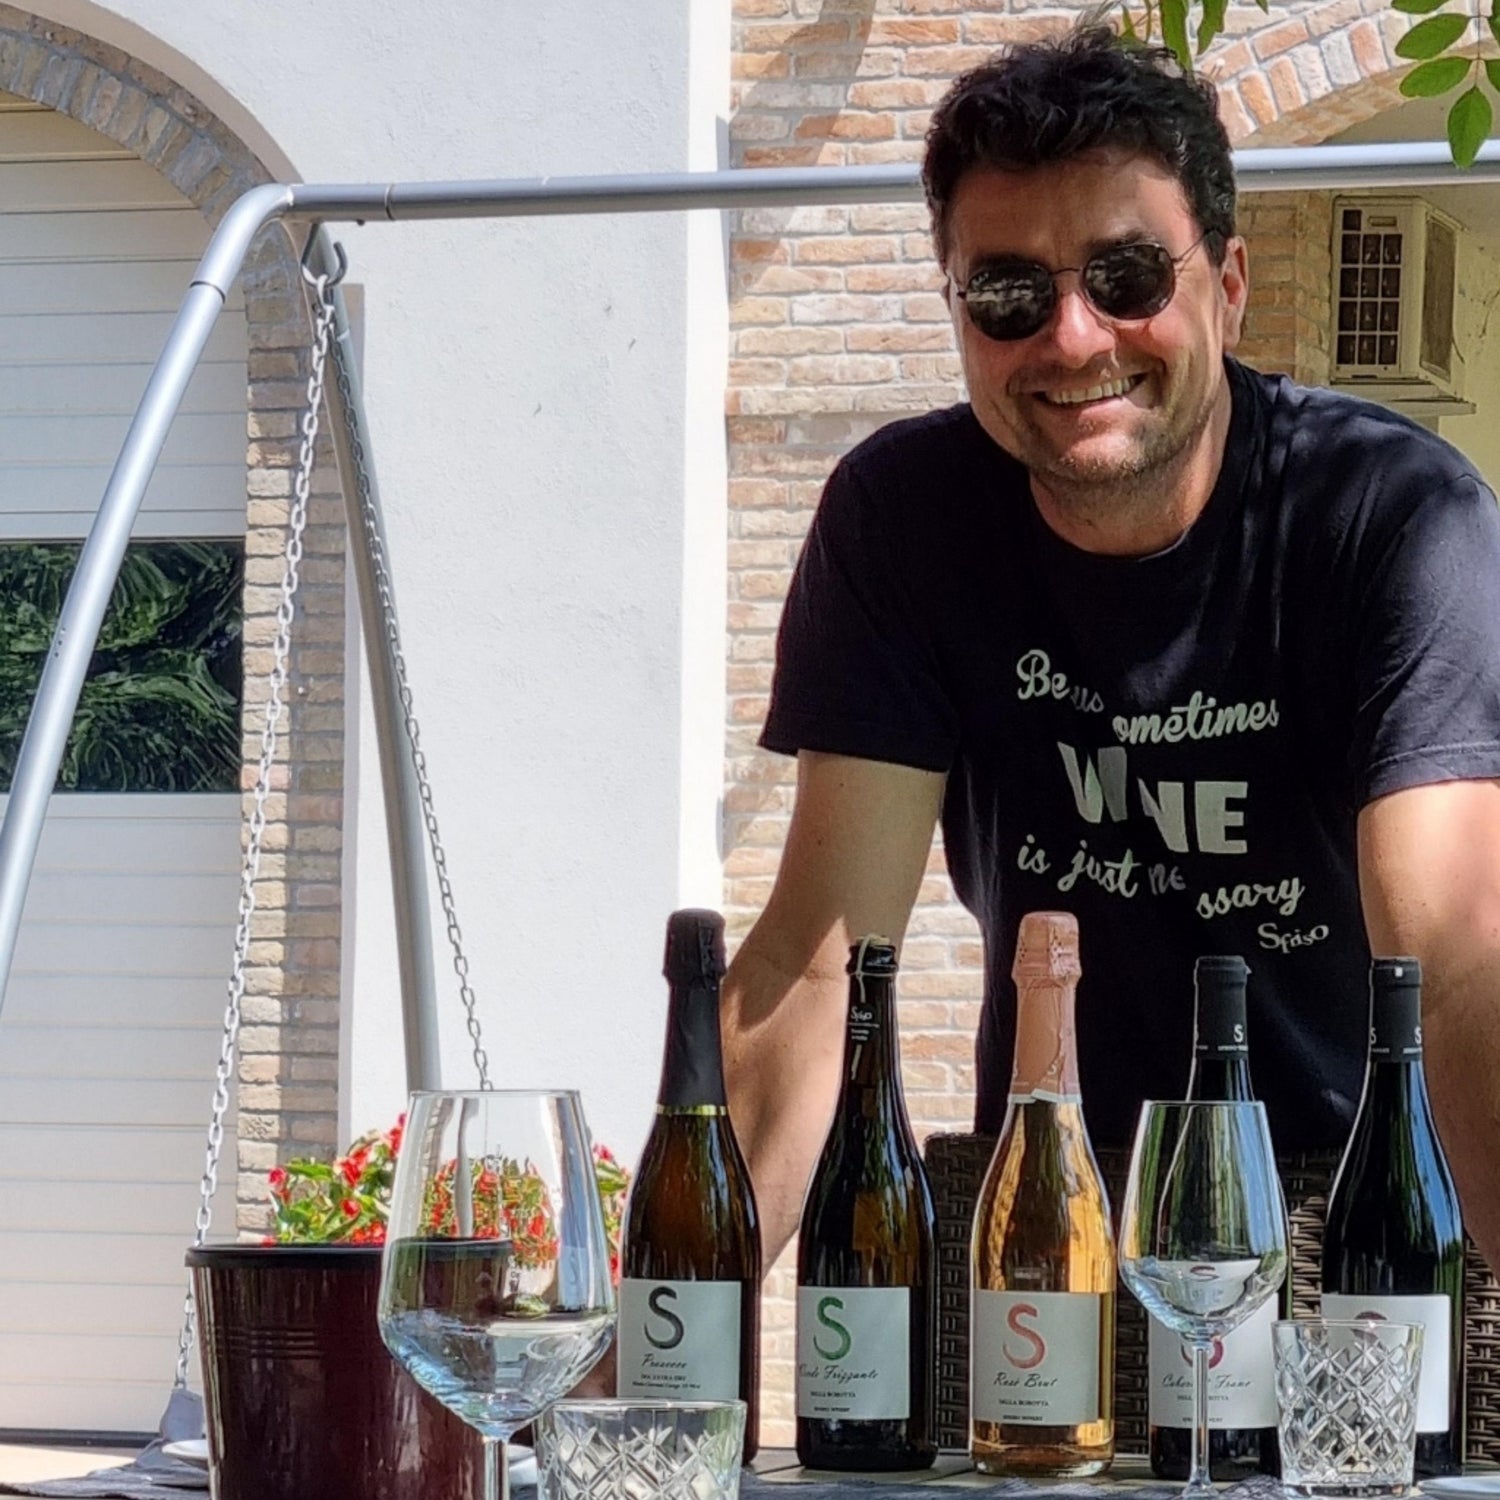 Pier Sfriso standing with the wine bottles in front of him on the tasting table